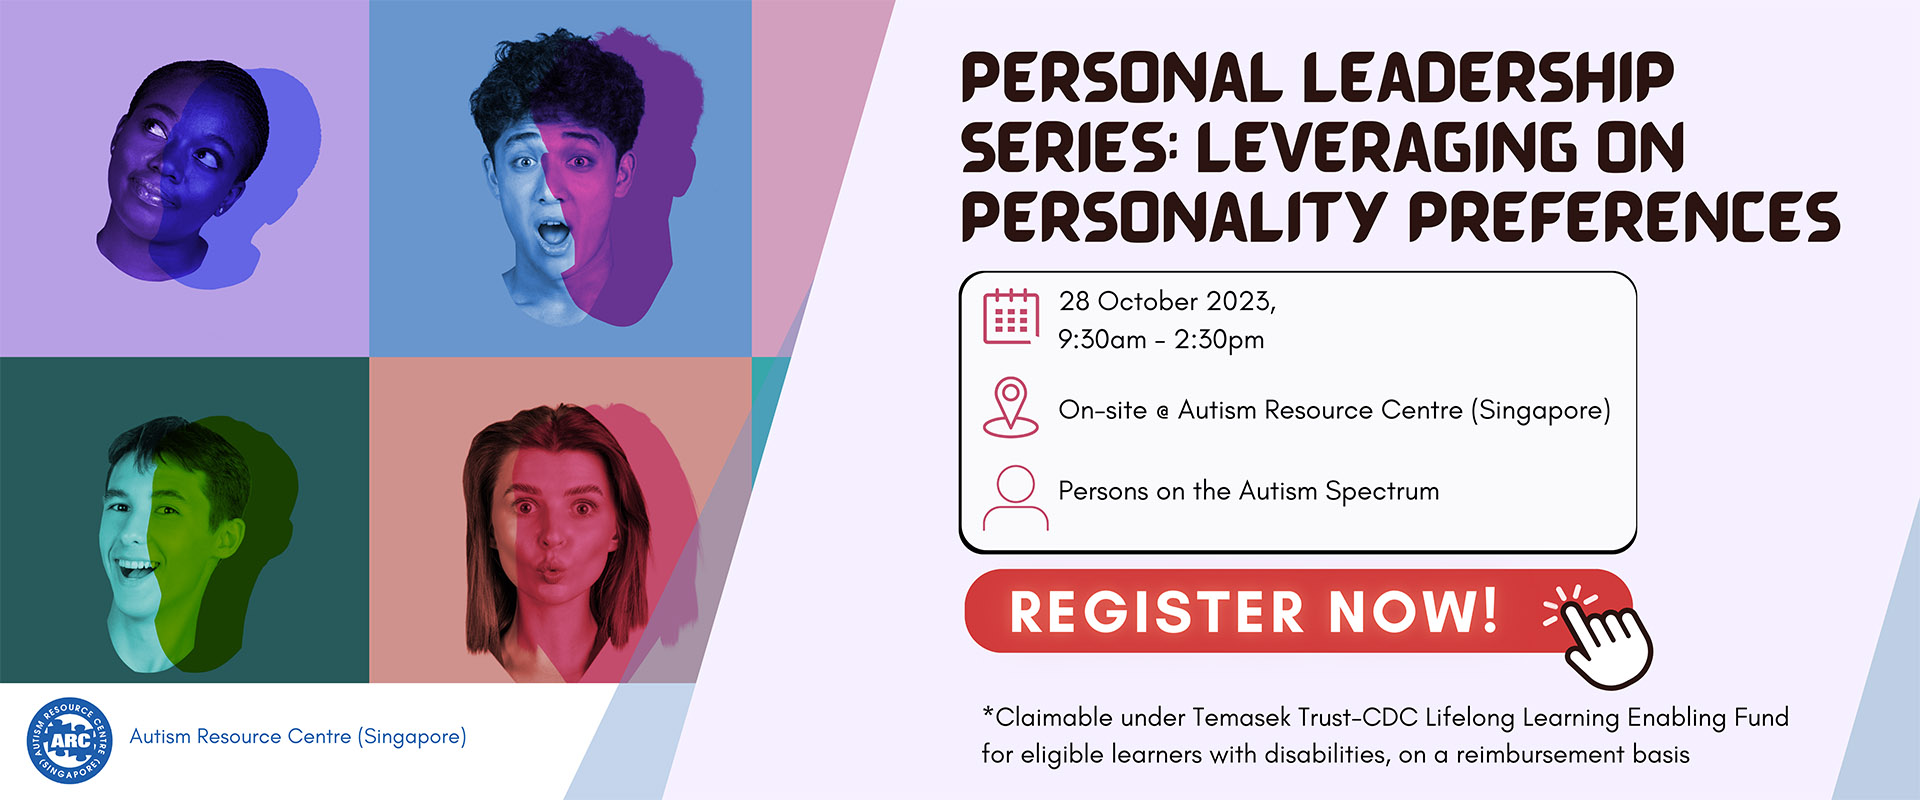 Personal Leadership Series: Leveraging on Personality Preferences